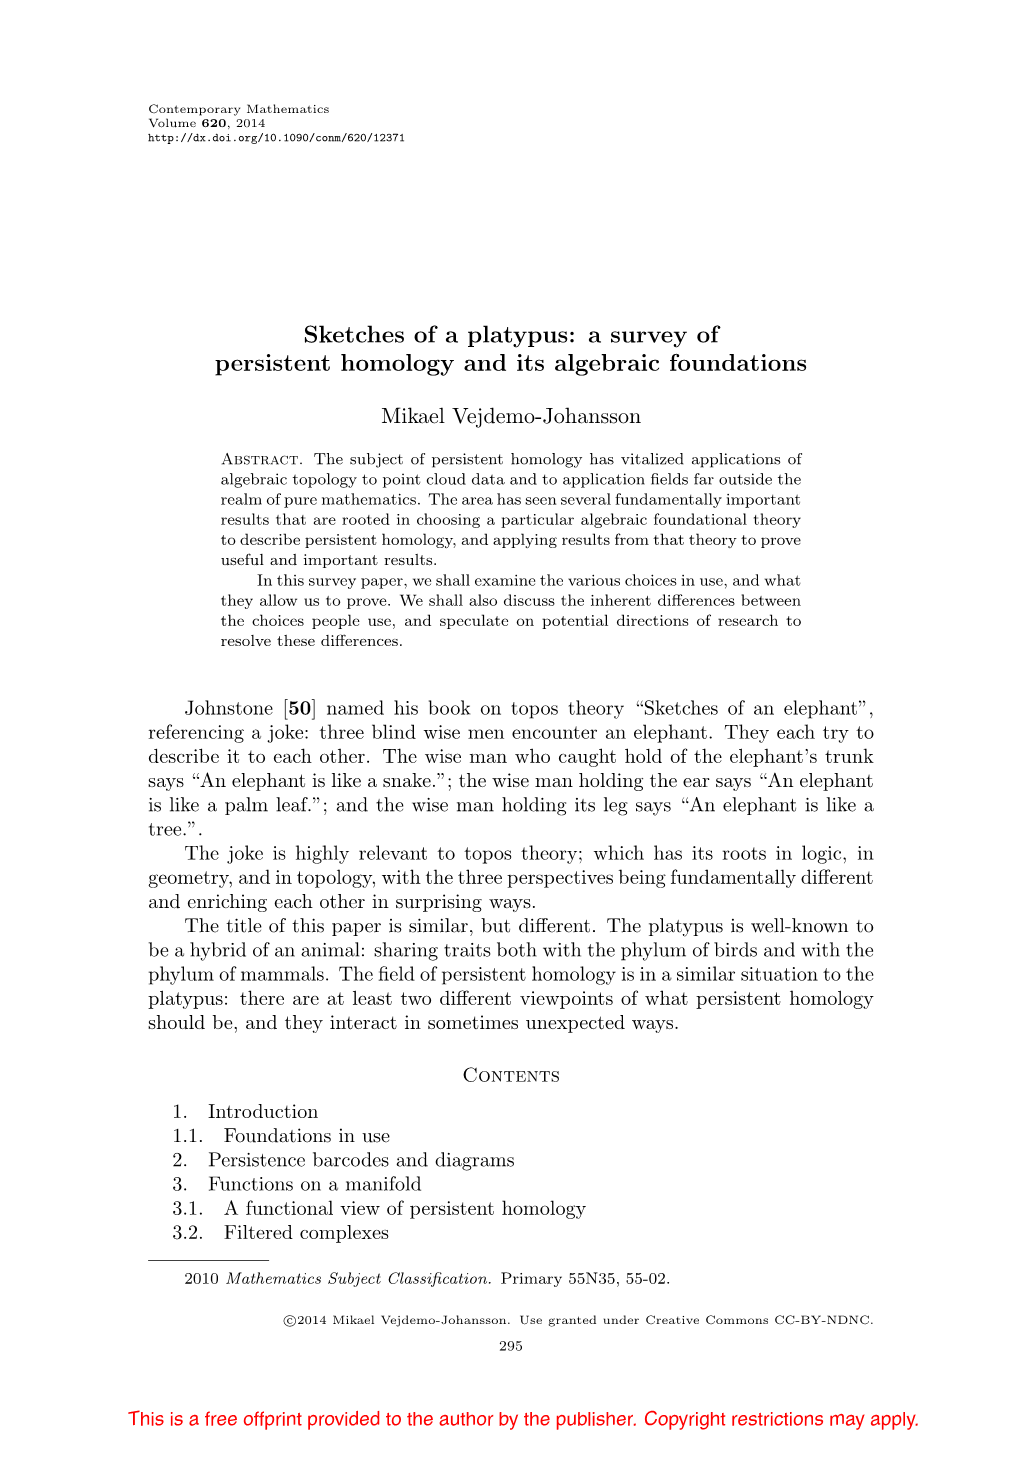 A Survey of Persistent Homology and Its Algebraic Foundations